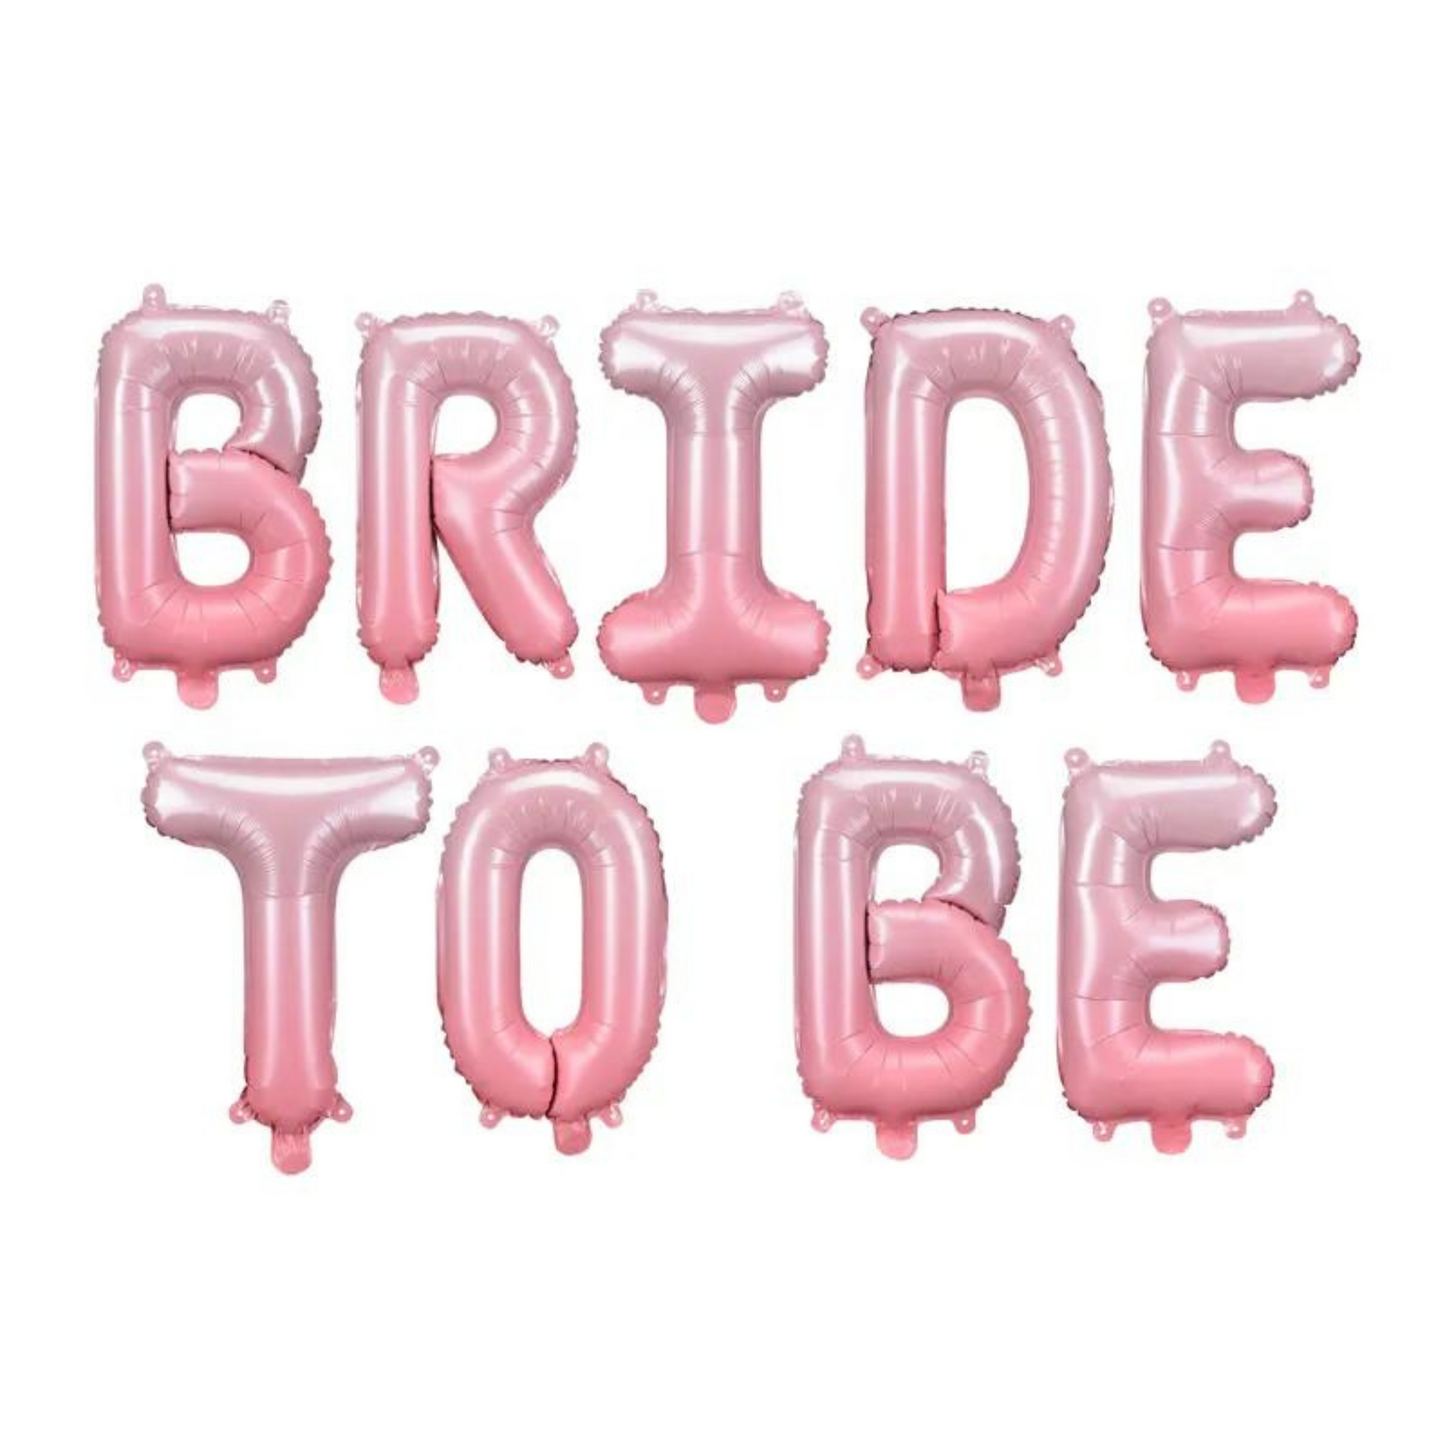 PINK OMBRE BRIDE-TO-BE BALLOON BANNER